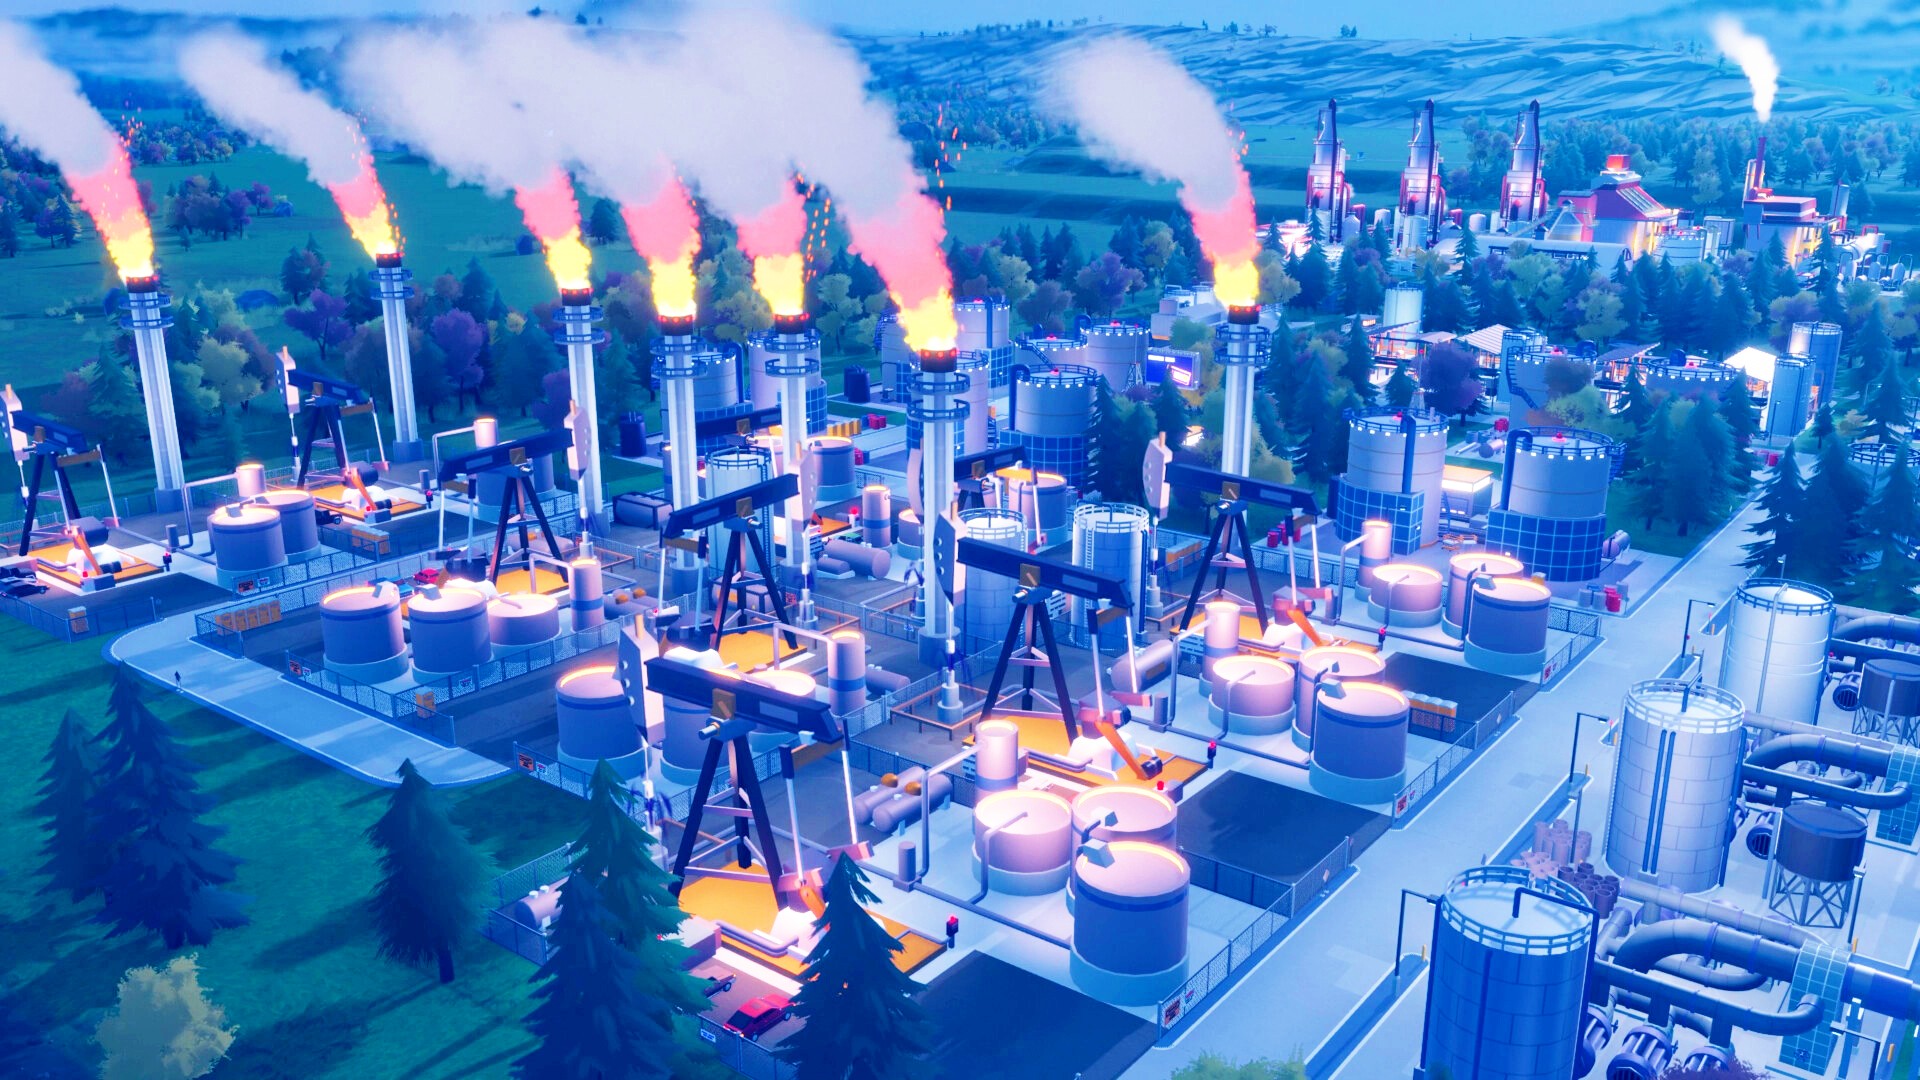 If Cities Skylines 2 let you down, this new strategy game is the cure